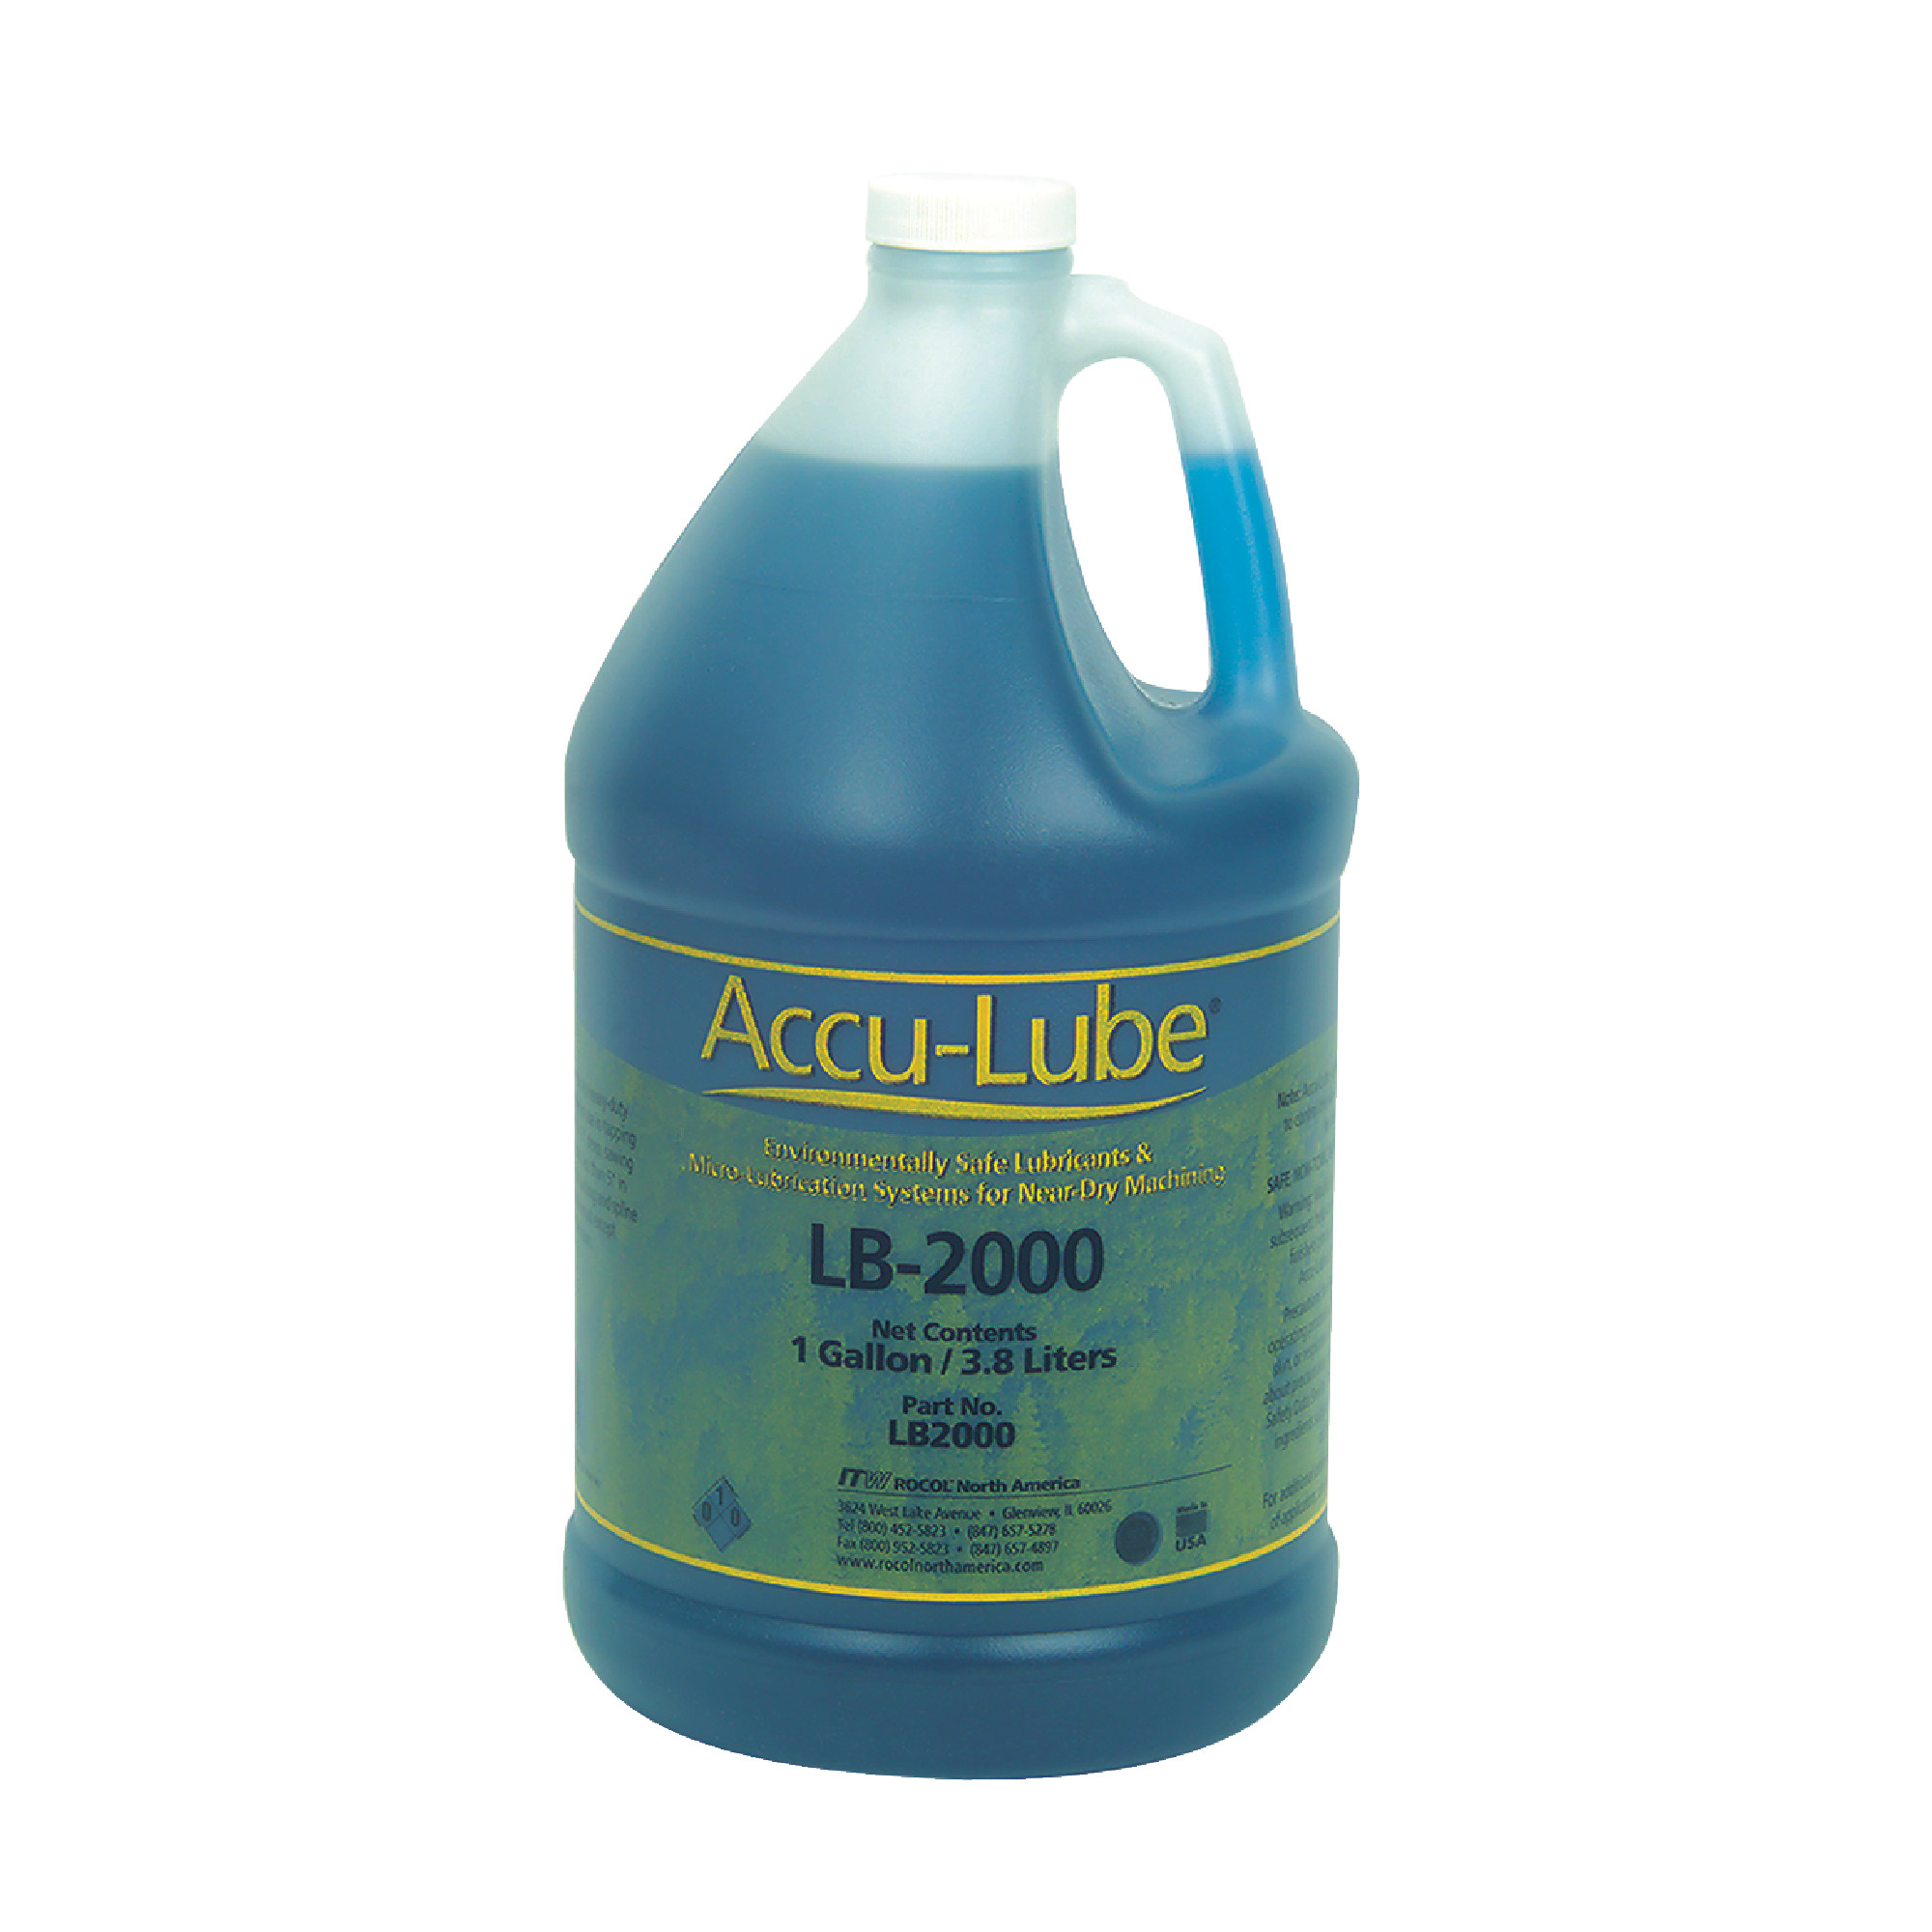 Diluted Coolant & Cutting Fluids